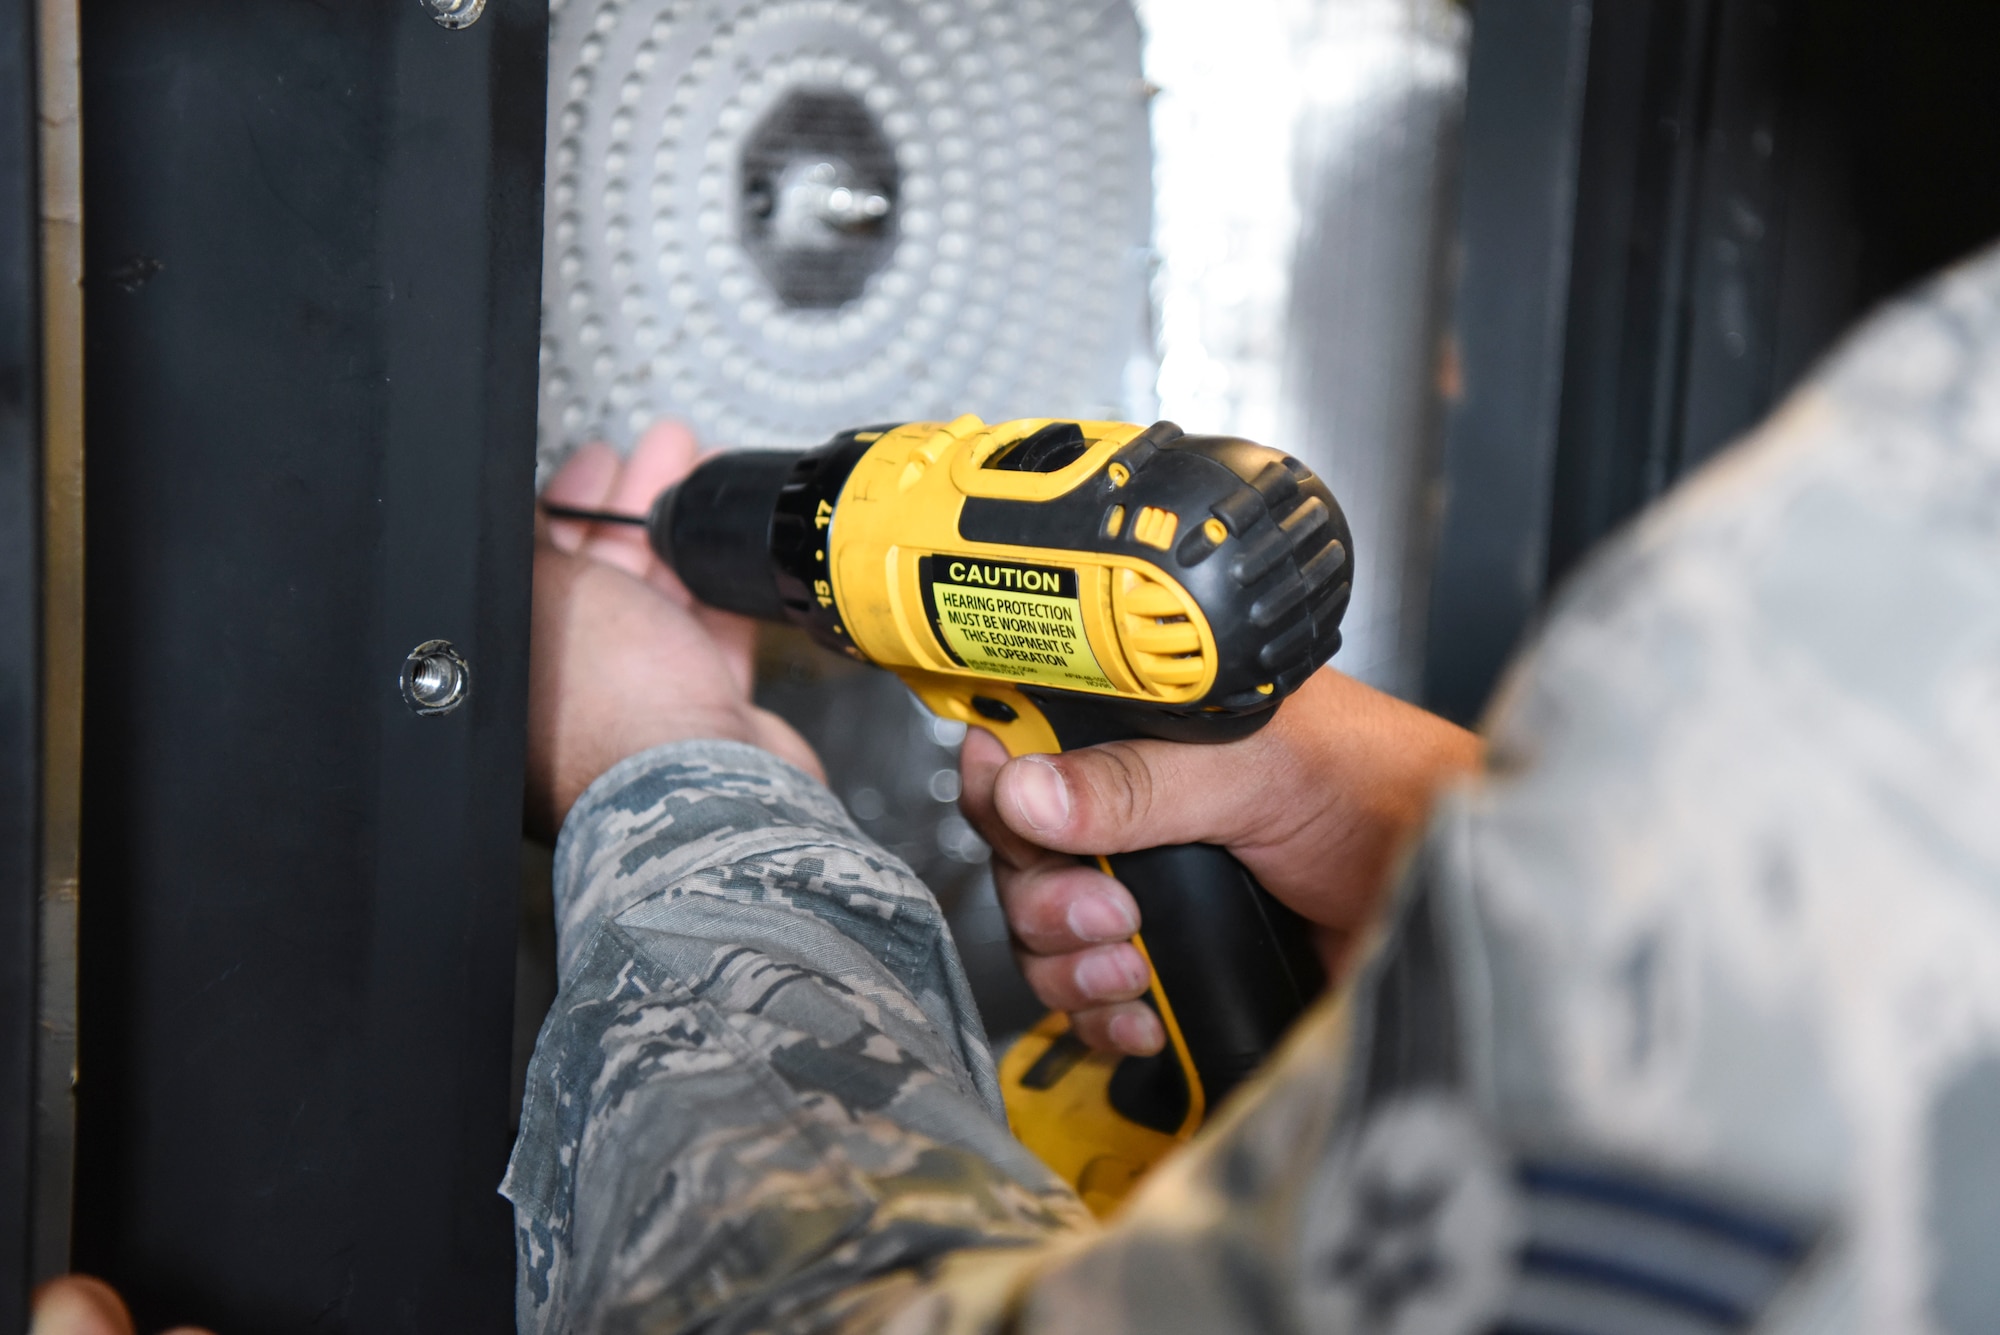 Senior Airman Kristian Martinez-felix, a 319th Civil Engineer Squadron heating, ventilation, air conditioning and refrigeration apprentice unscrews a water boiler June 20, 2018, on Grand Forks Air Force Base, North Dakota. Martinez-Felix unscrews the water boiler so that he can see if it has possible overflow or needs cleaning. (U.S. Air Force photo by Airman 1st Class Melody Wolff)